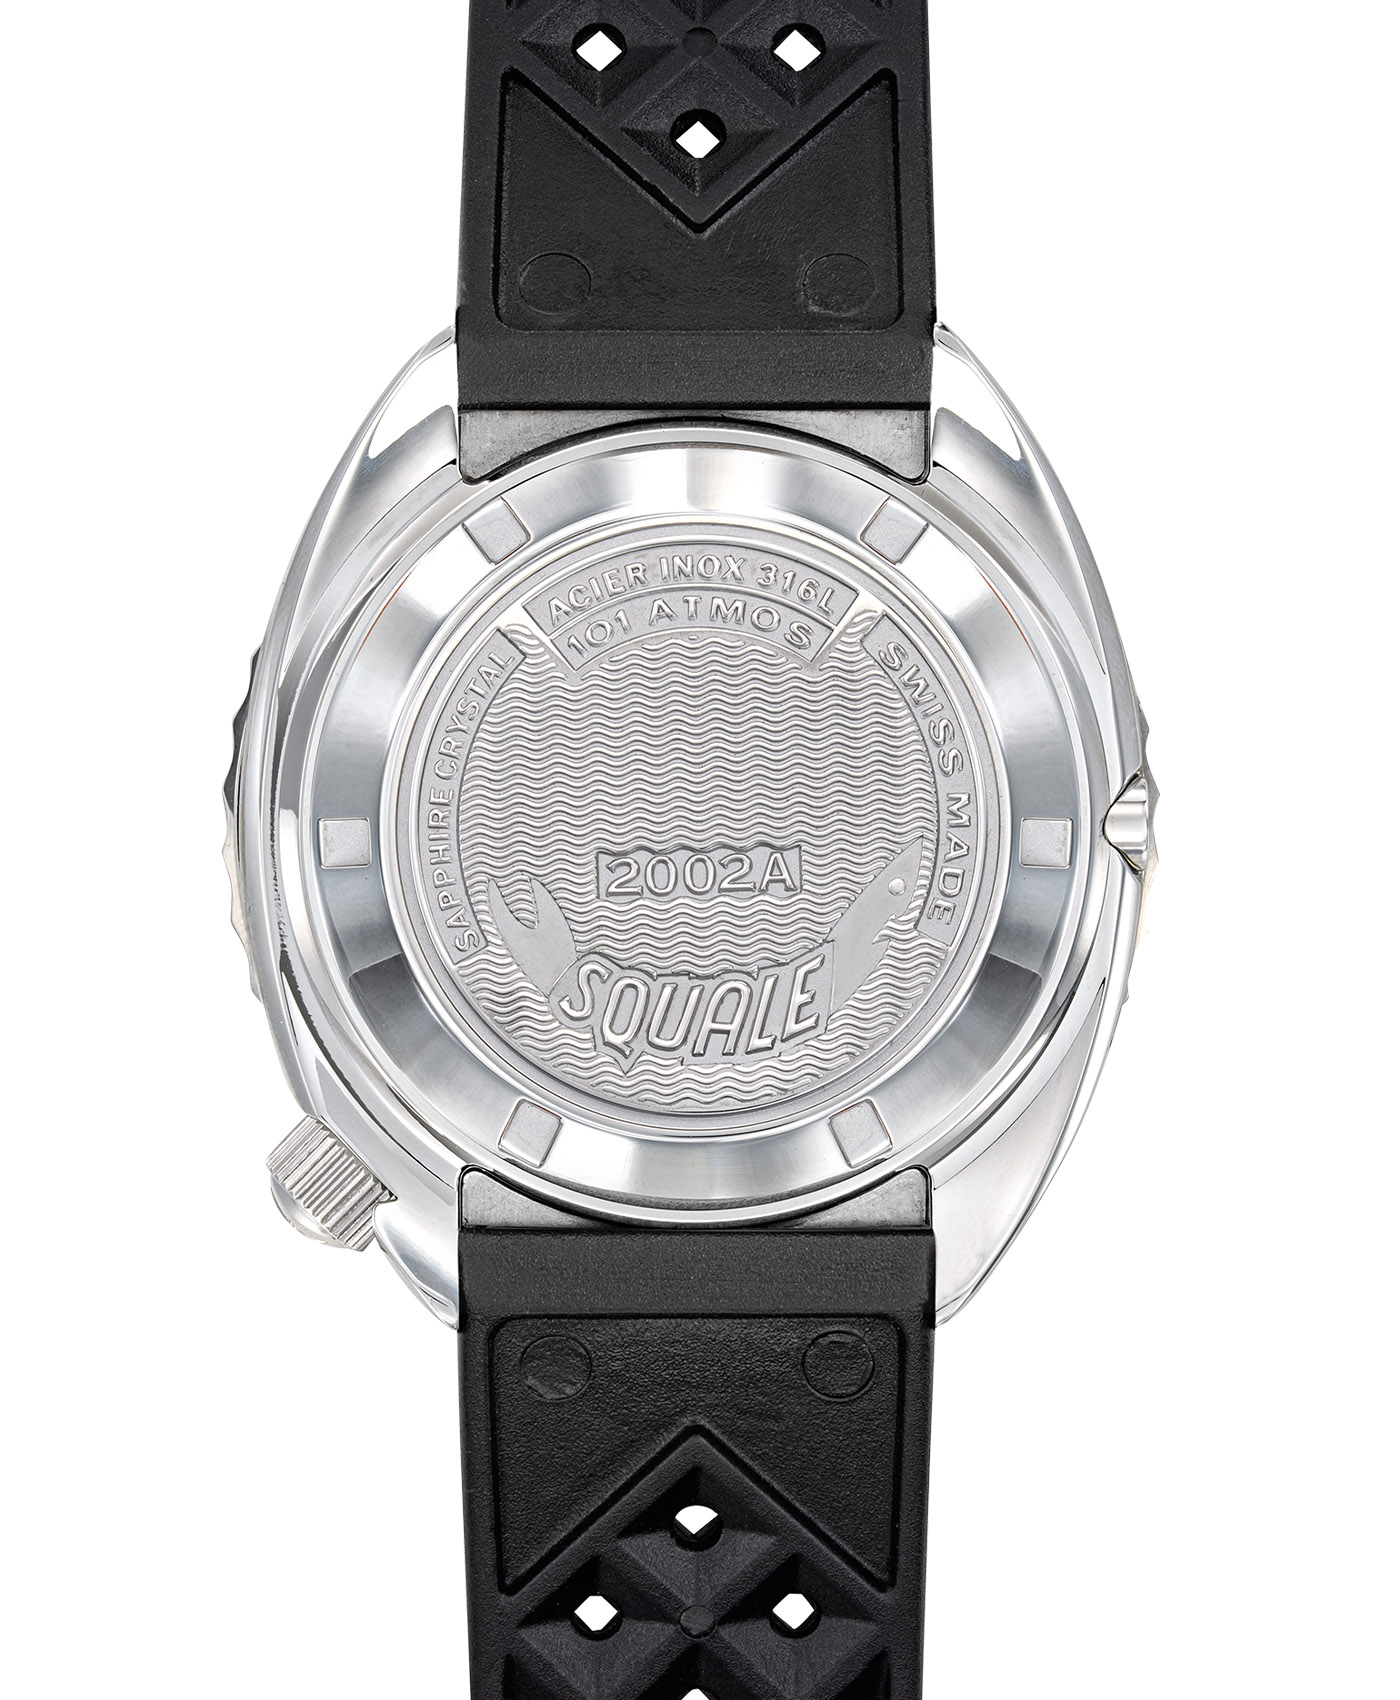 Squale-2002 Series-101 Atmos-Polished-BlackDots-caseback